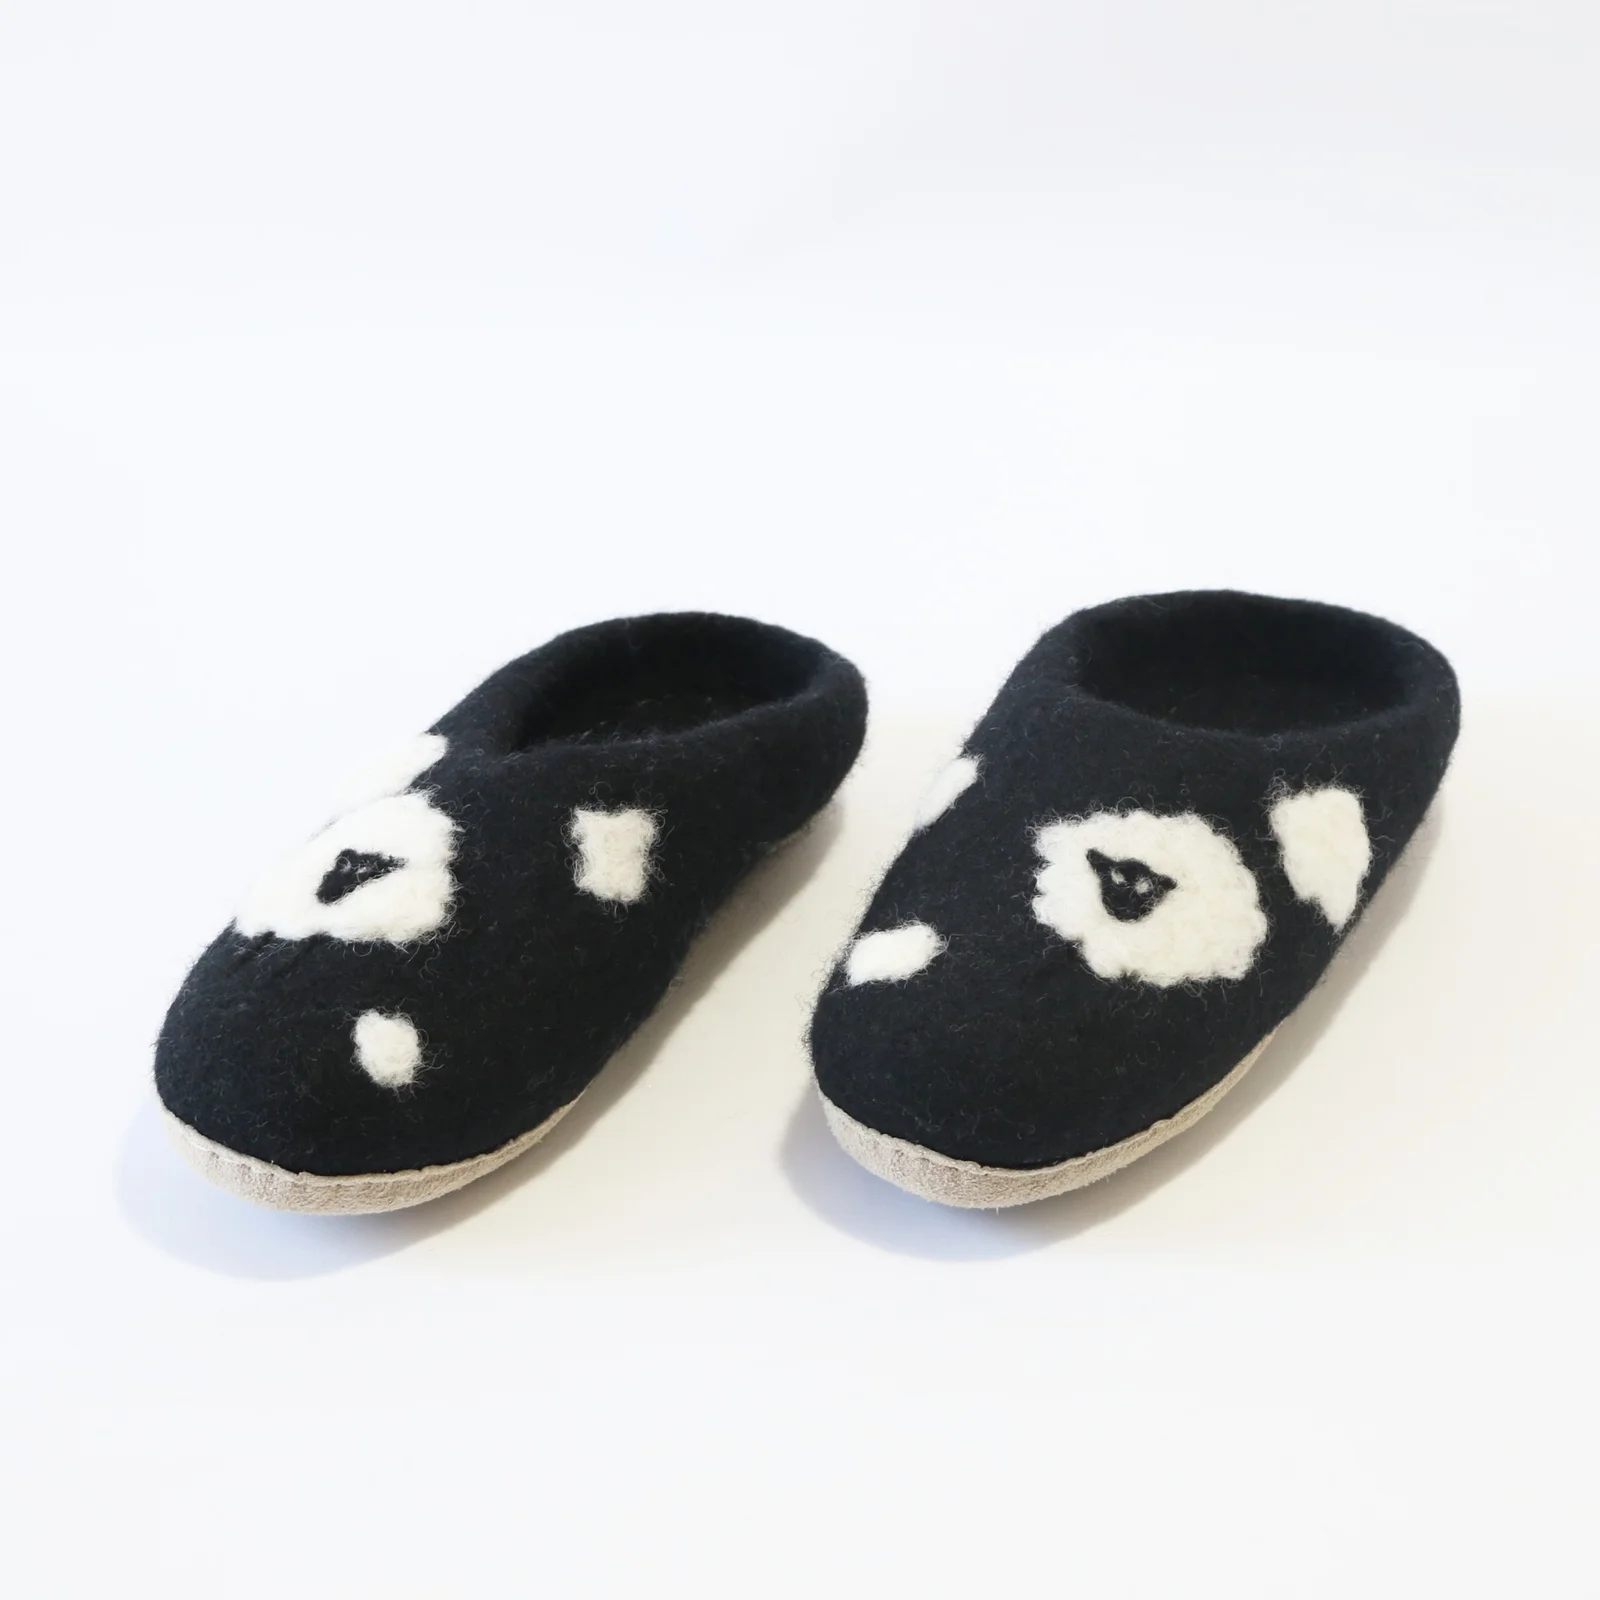 Handmade Felt Slippers The Perfect Addition to Your Home Comfort